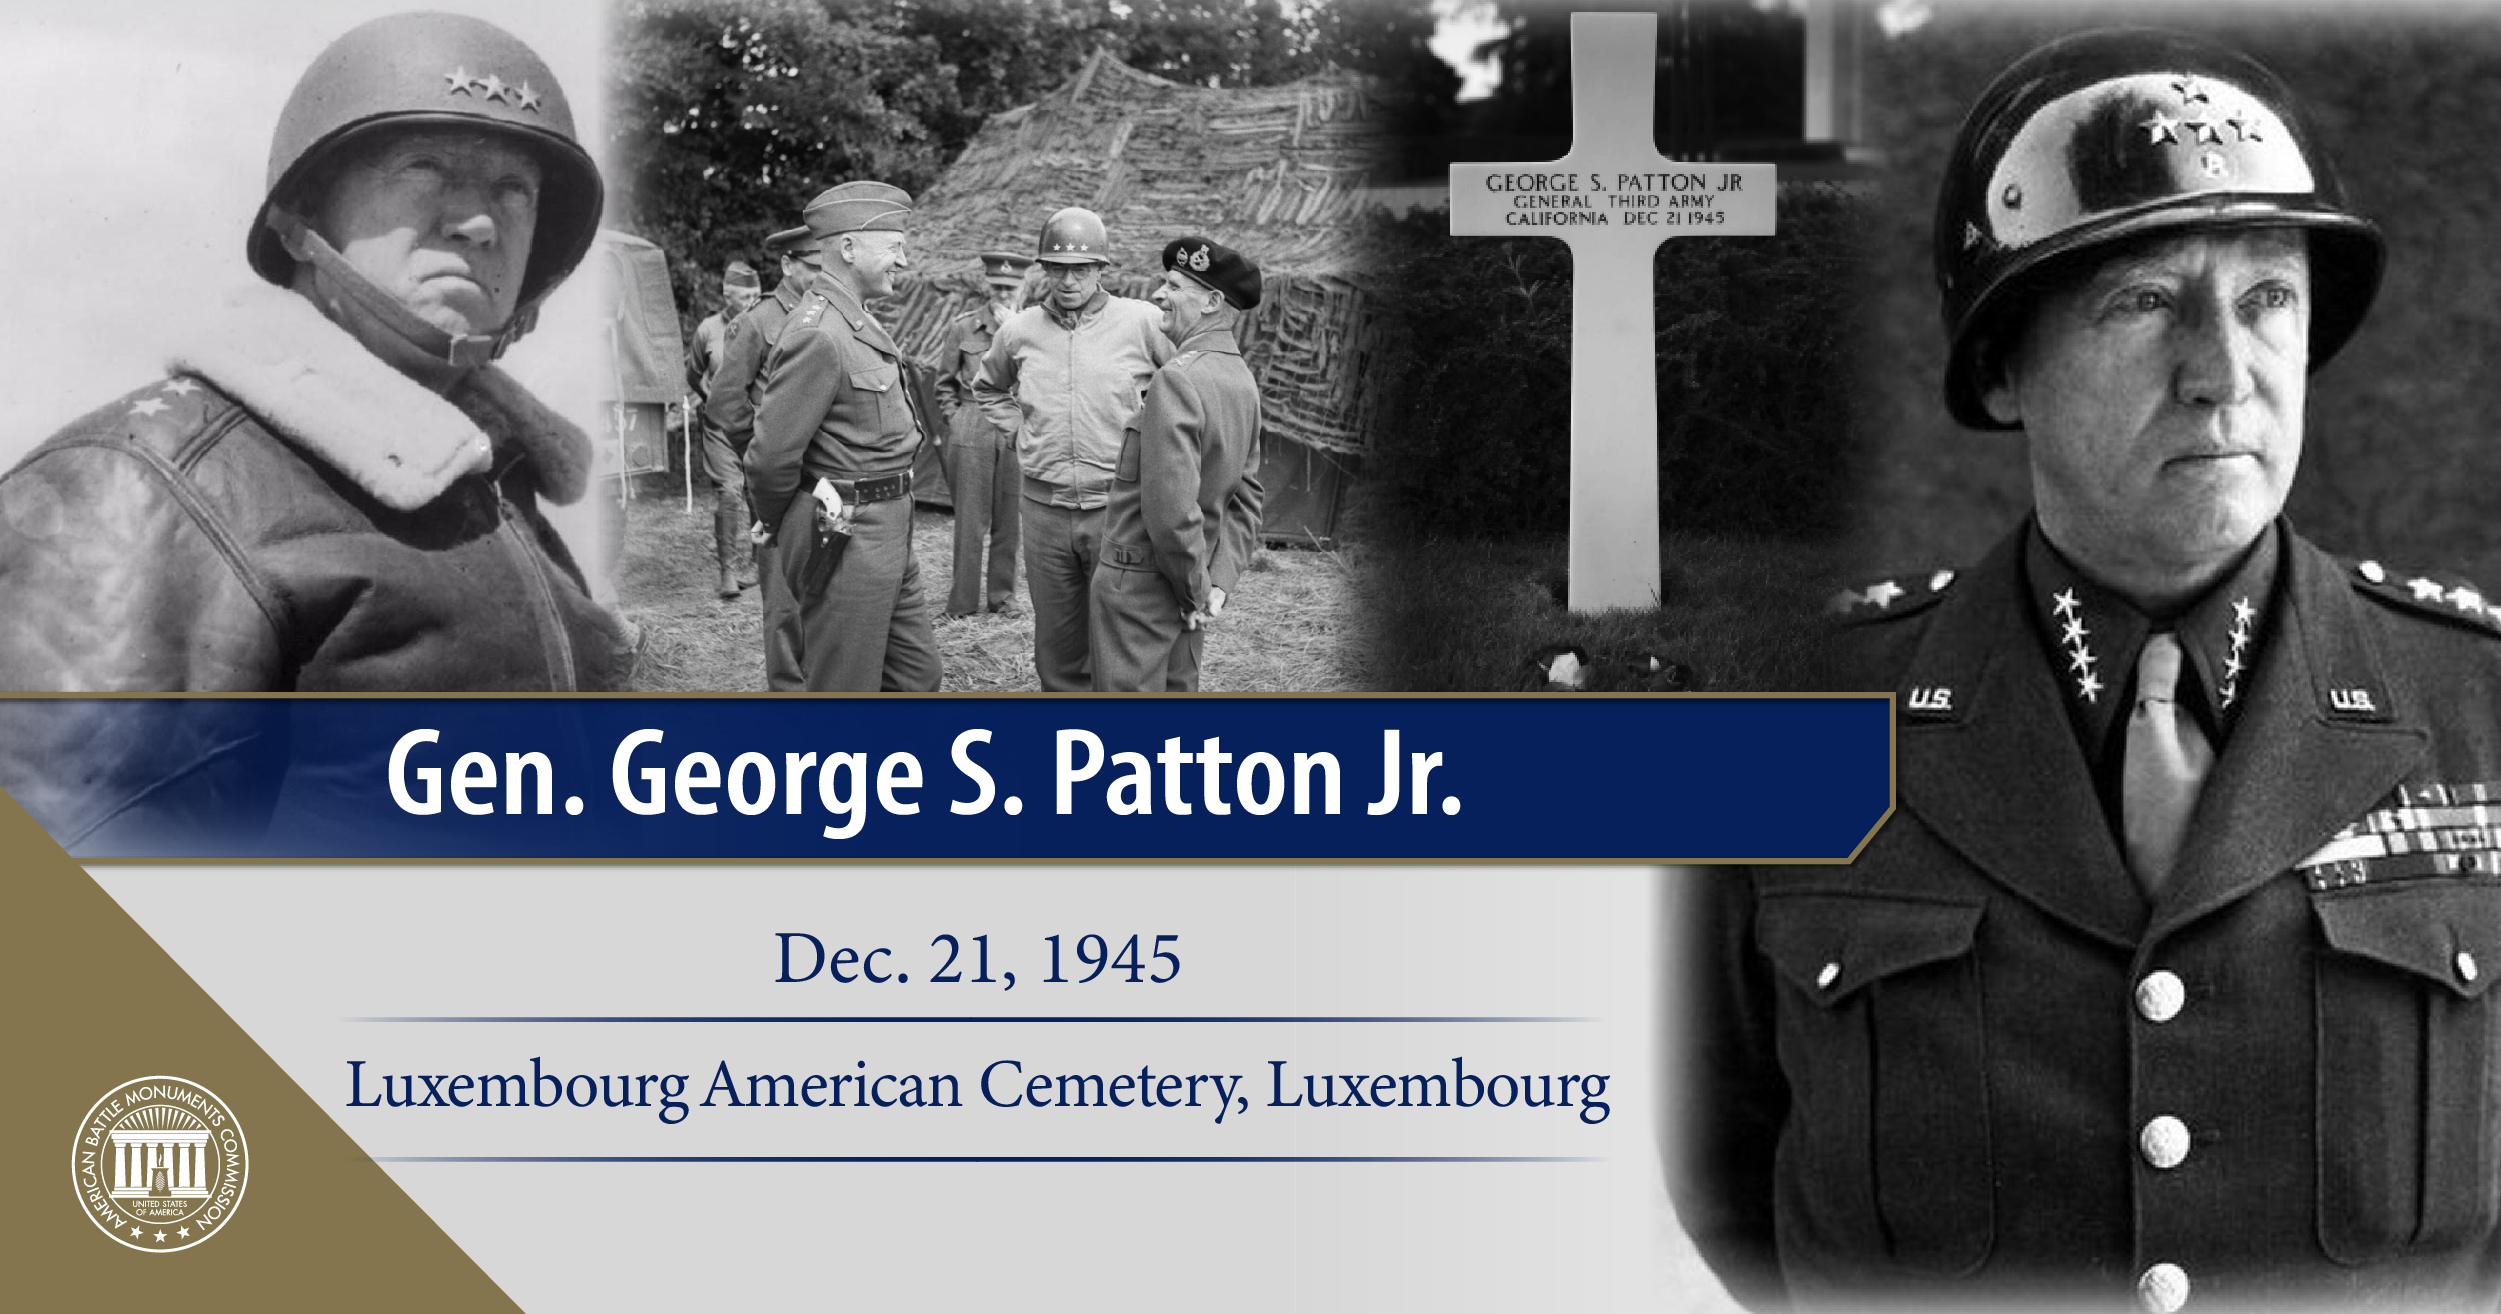 Gen. George S. Patton, Jr. is buried in Luxembourg American Cemetery